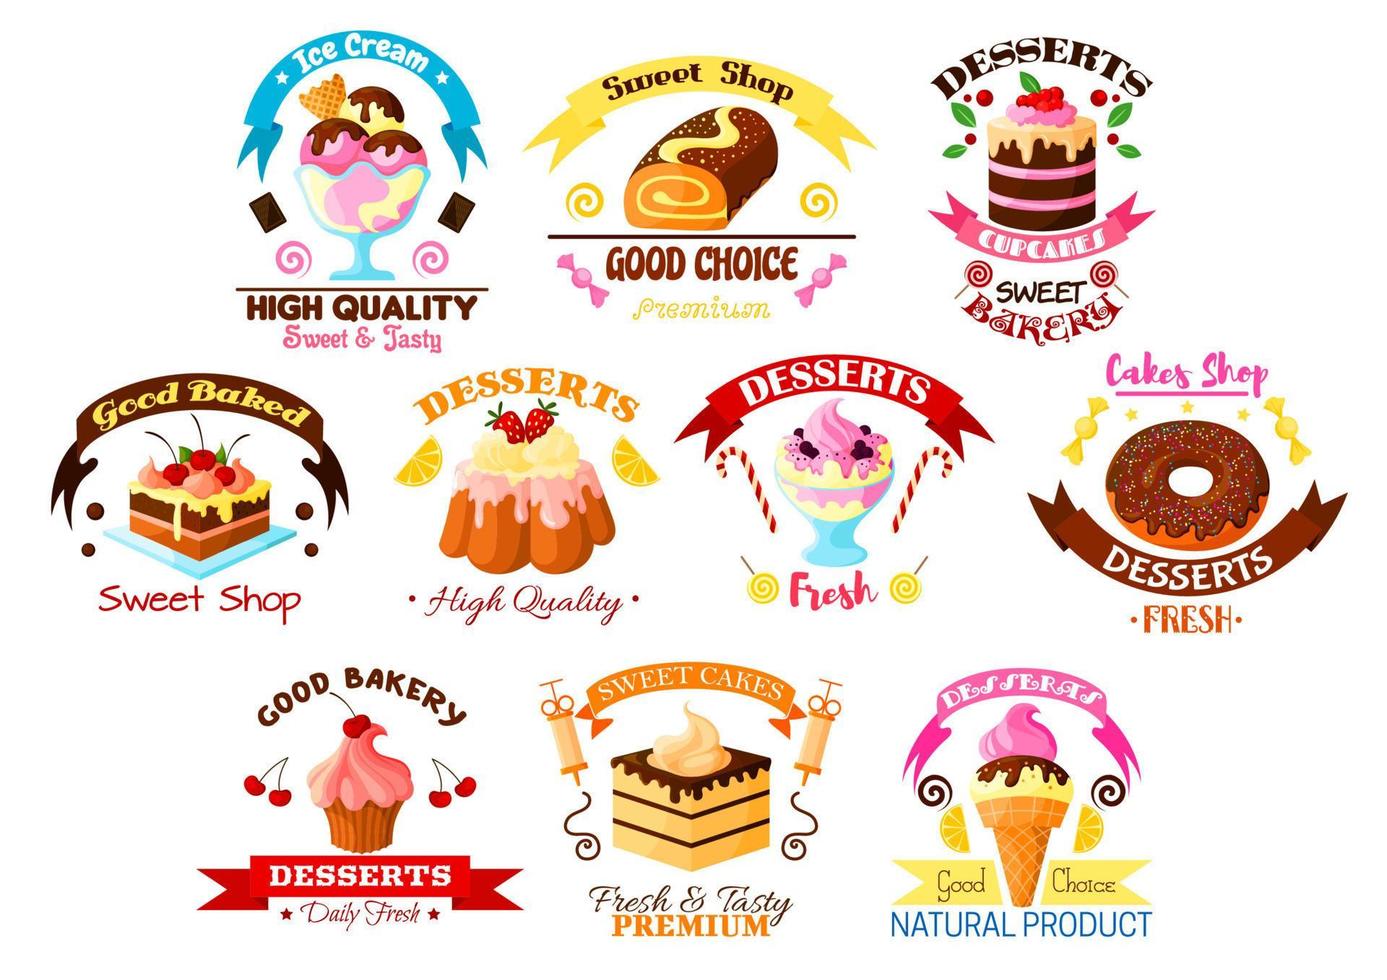 Desserts and cakes vector icons or emblems set